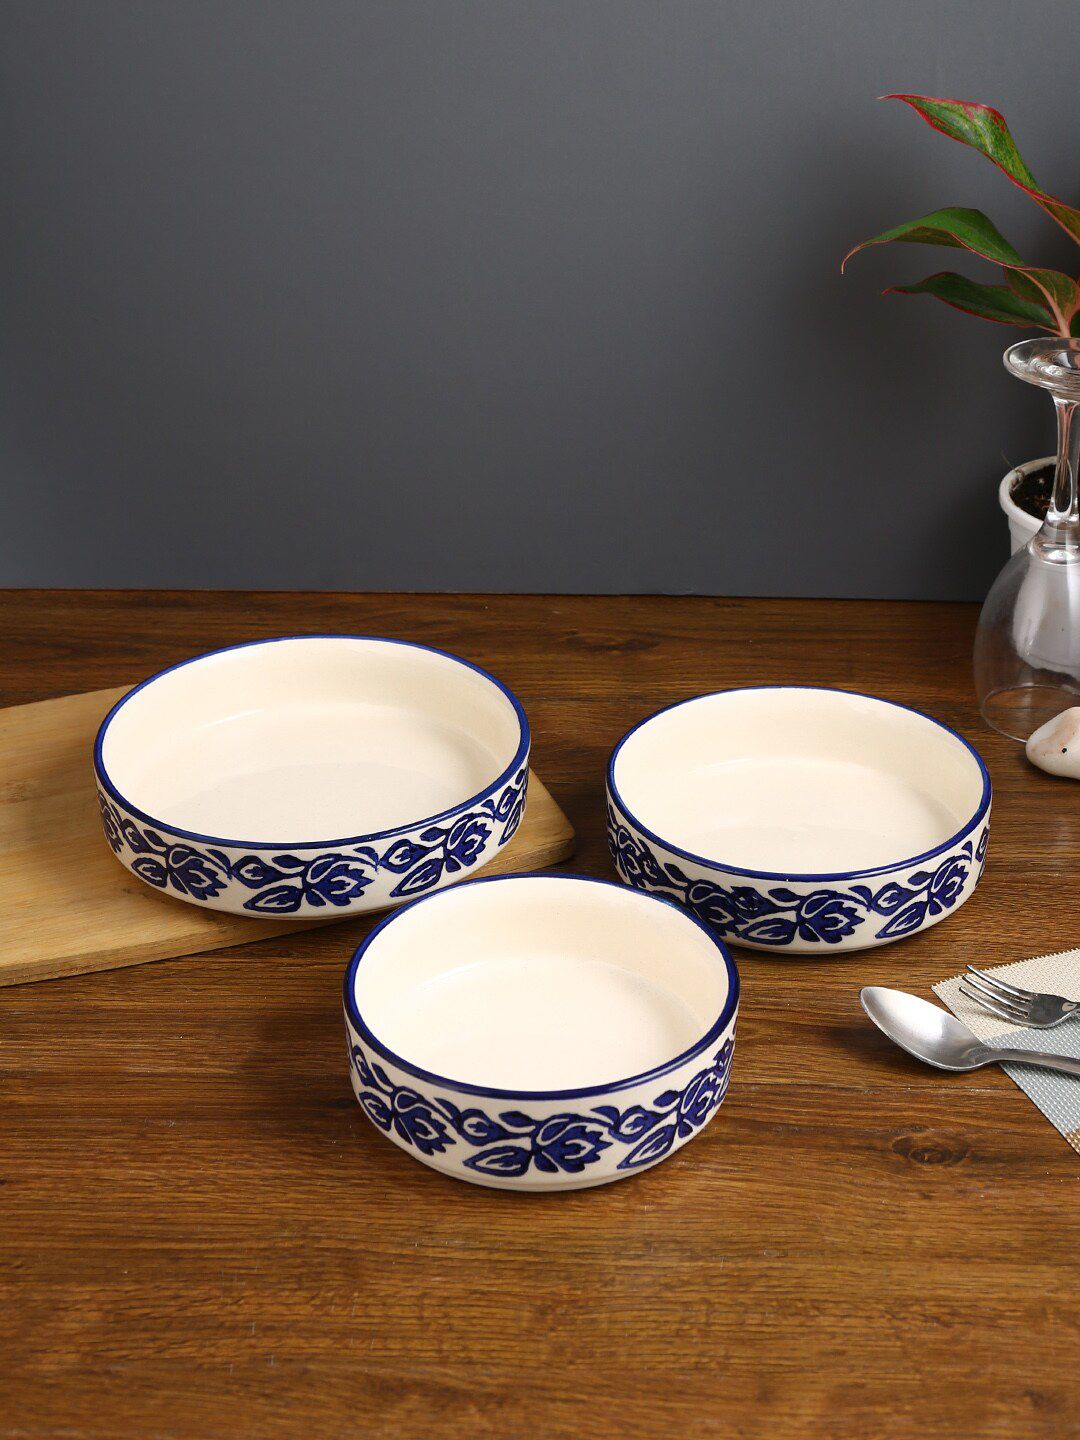 Aapno Rajasthan Set Of 3 Blue & White Patterned Serving Bowl Price in India